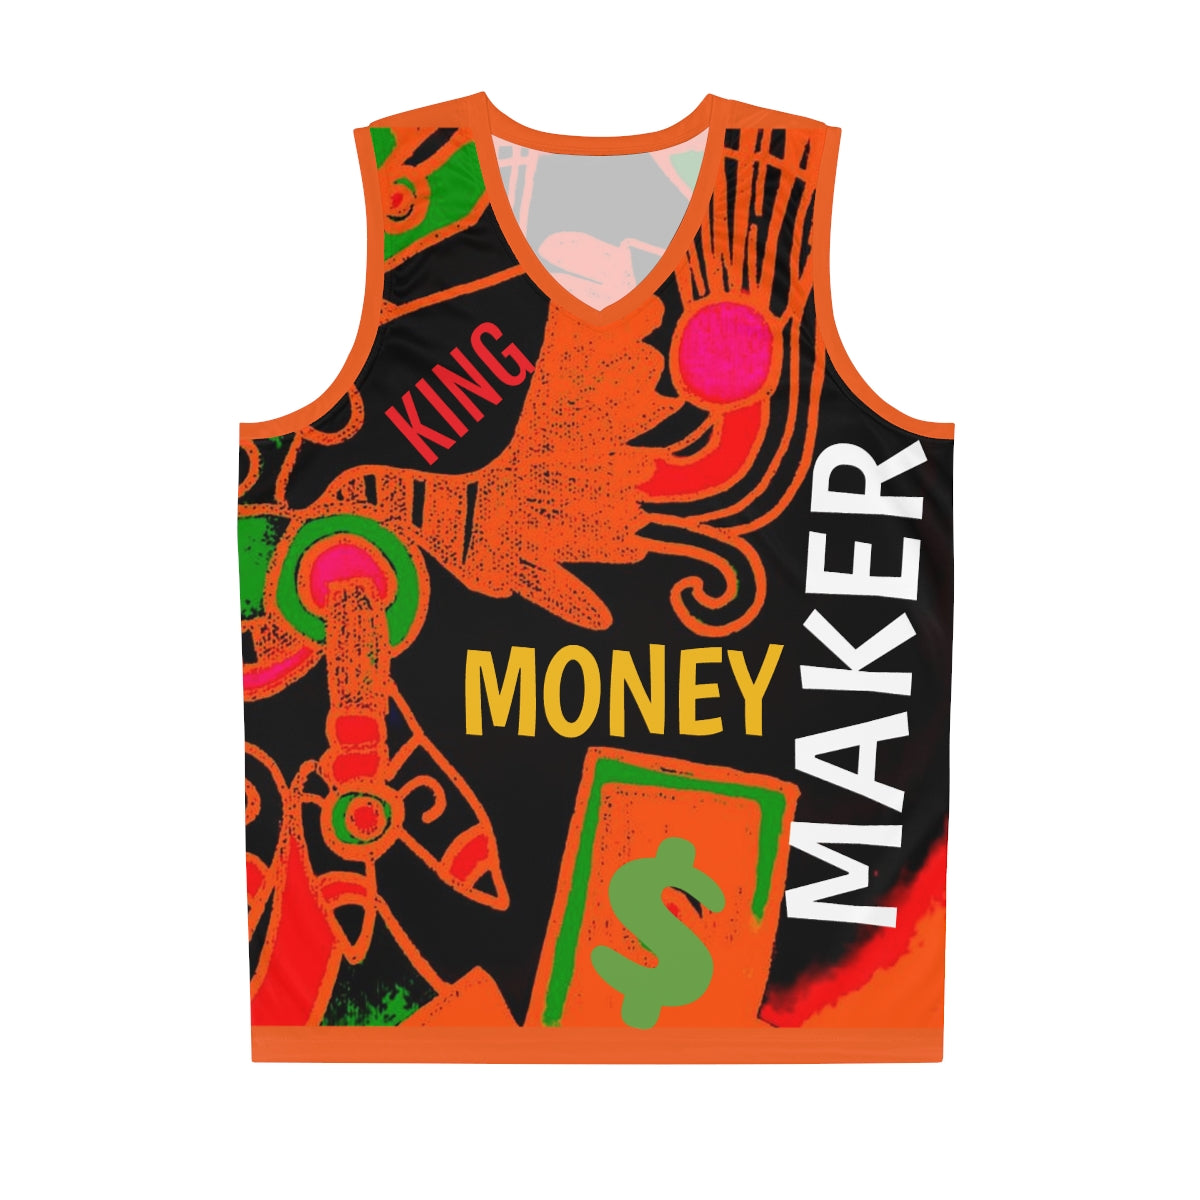 Basketball Jersey - KING MONEY MAKER - Concept Creation by SPECIES